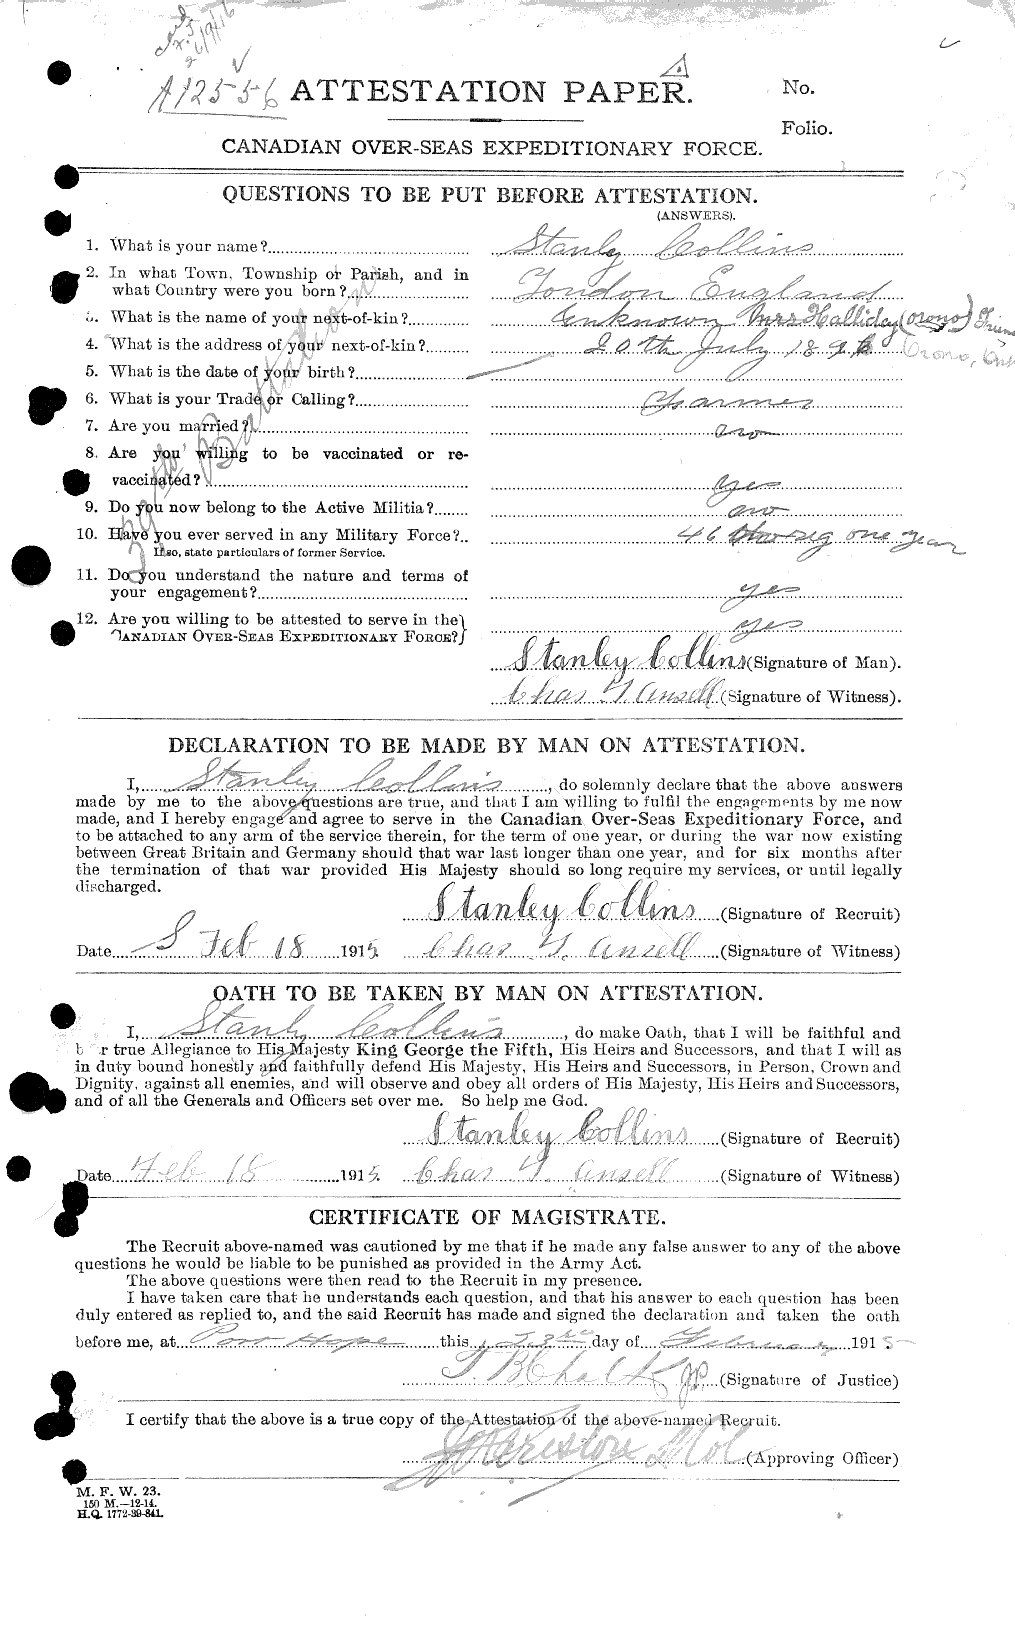 Personnel Records of the First World War - CEF 034551a